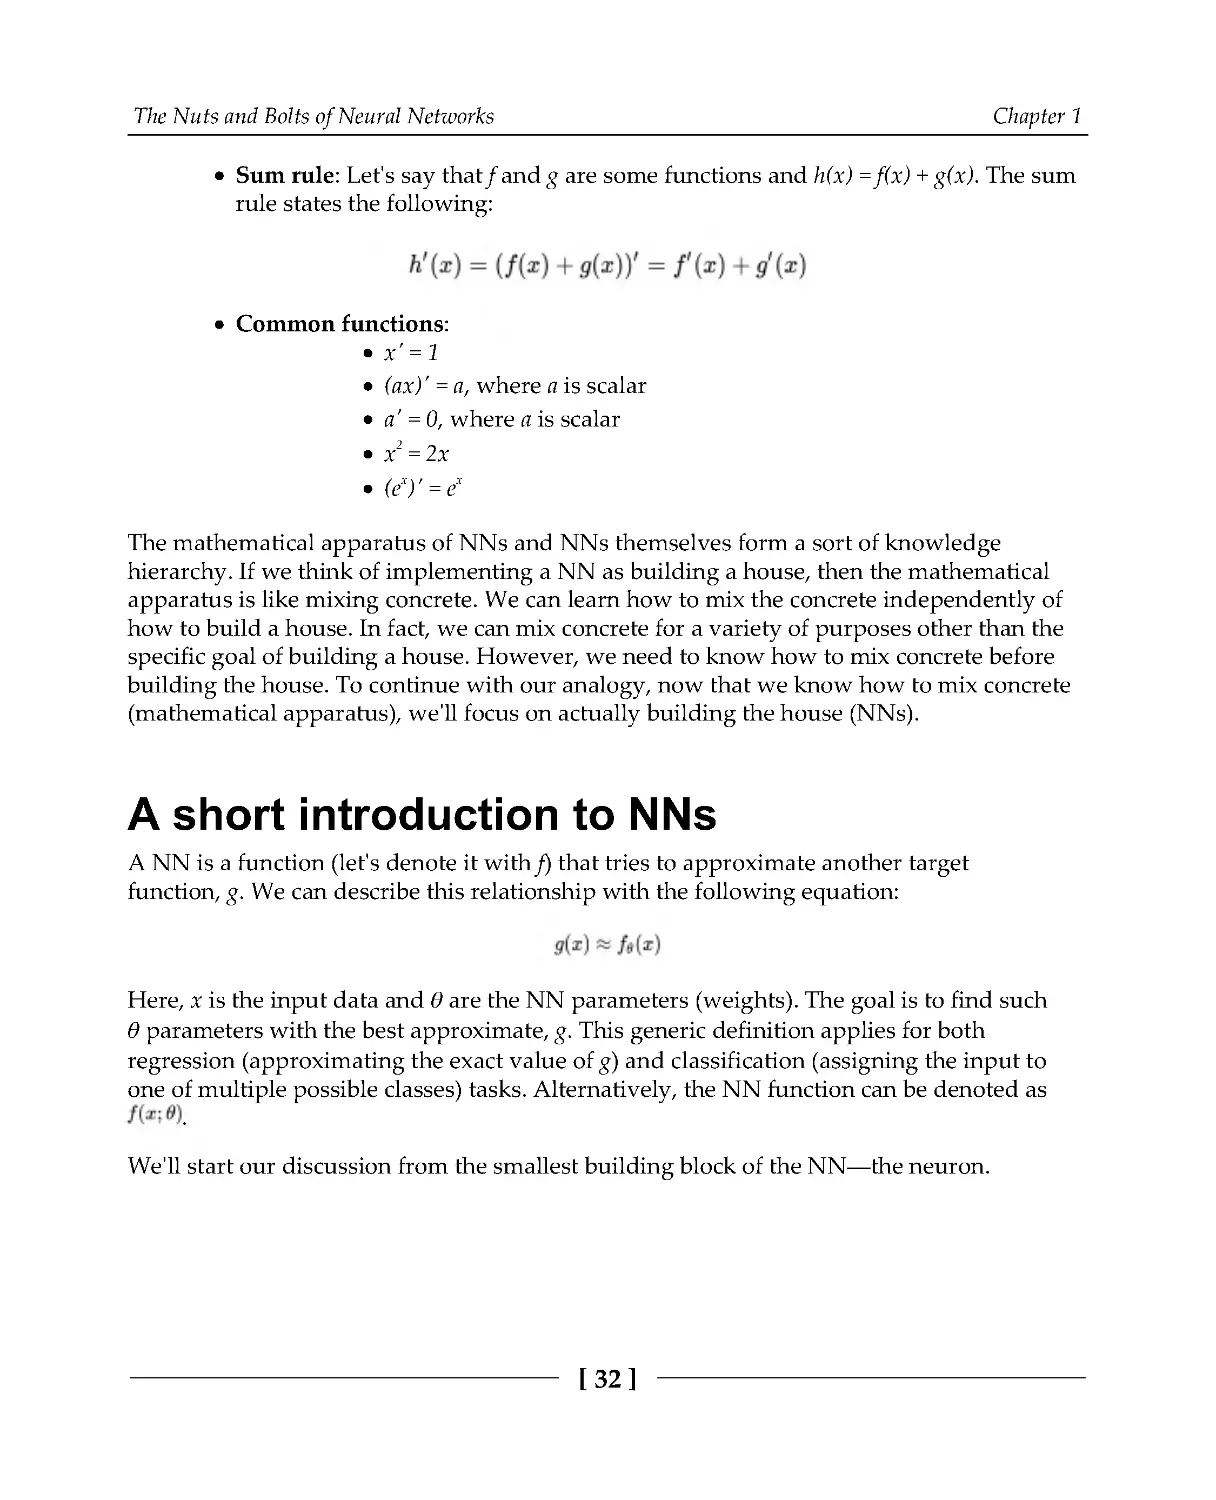 A short introduction to NNs